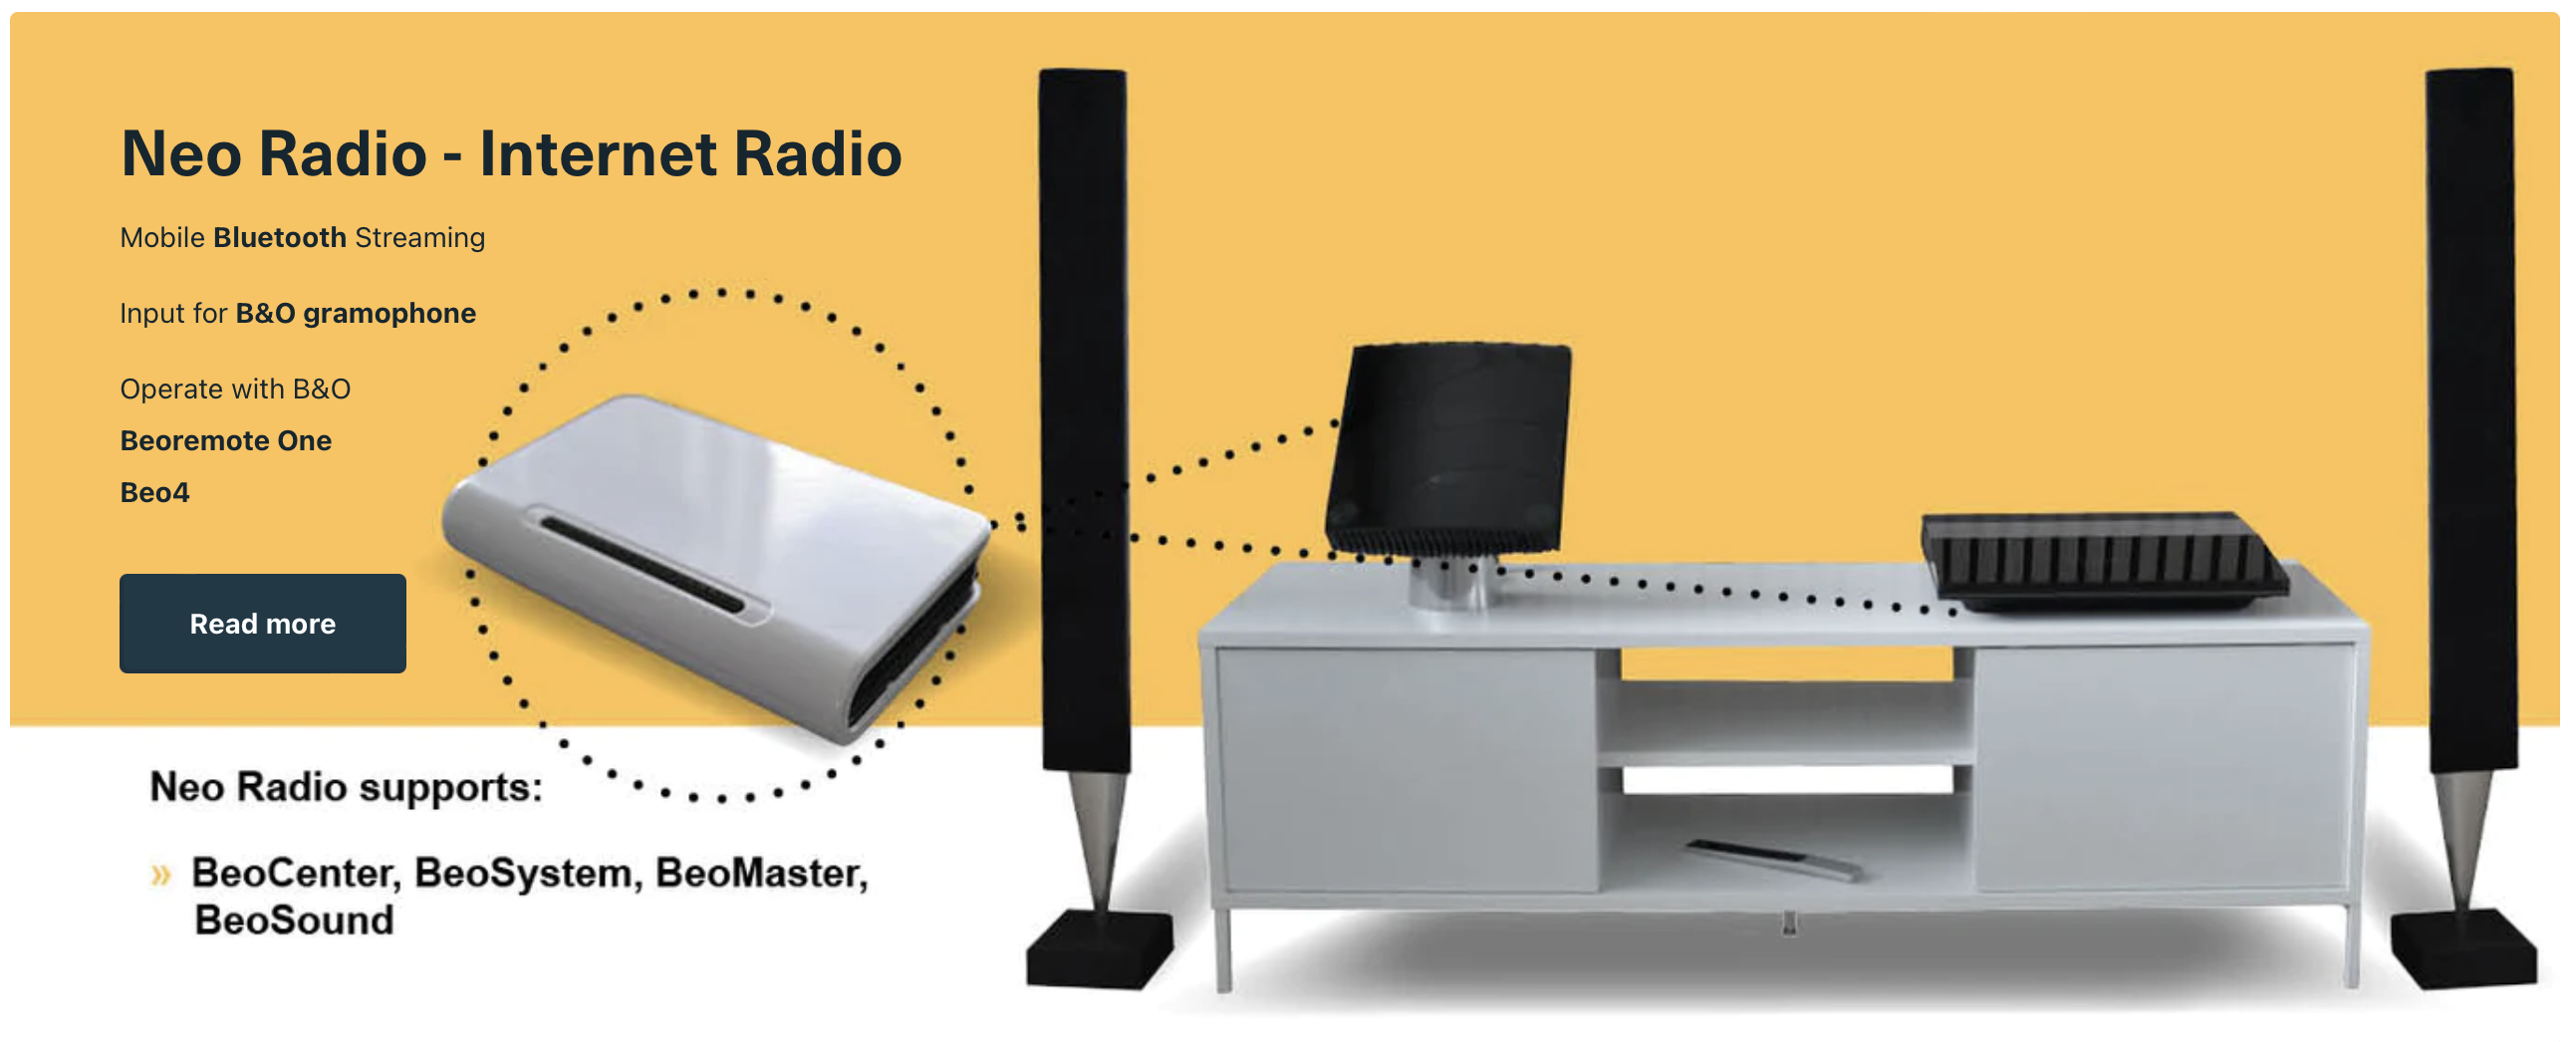 Neo Radio - streams sound to your B&O products with Neo technology for your B&O product